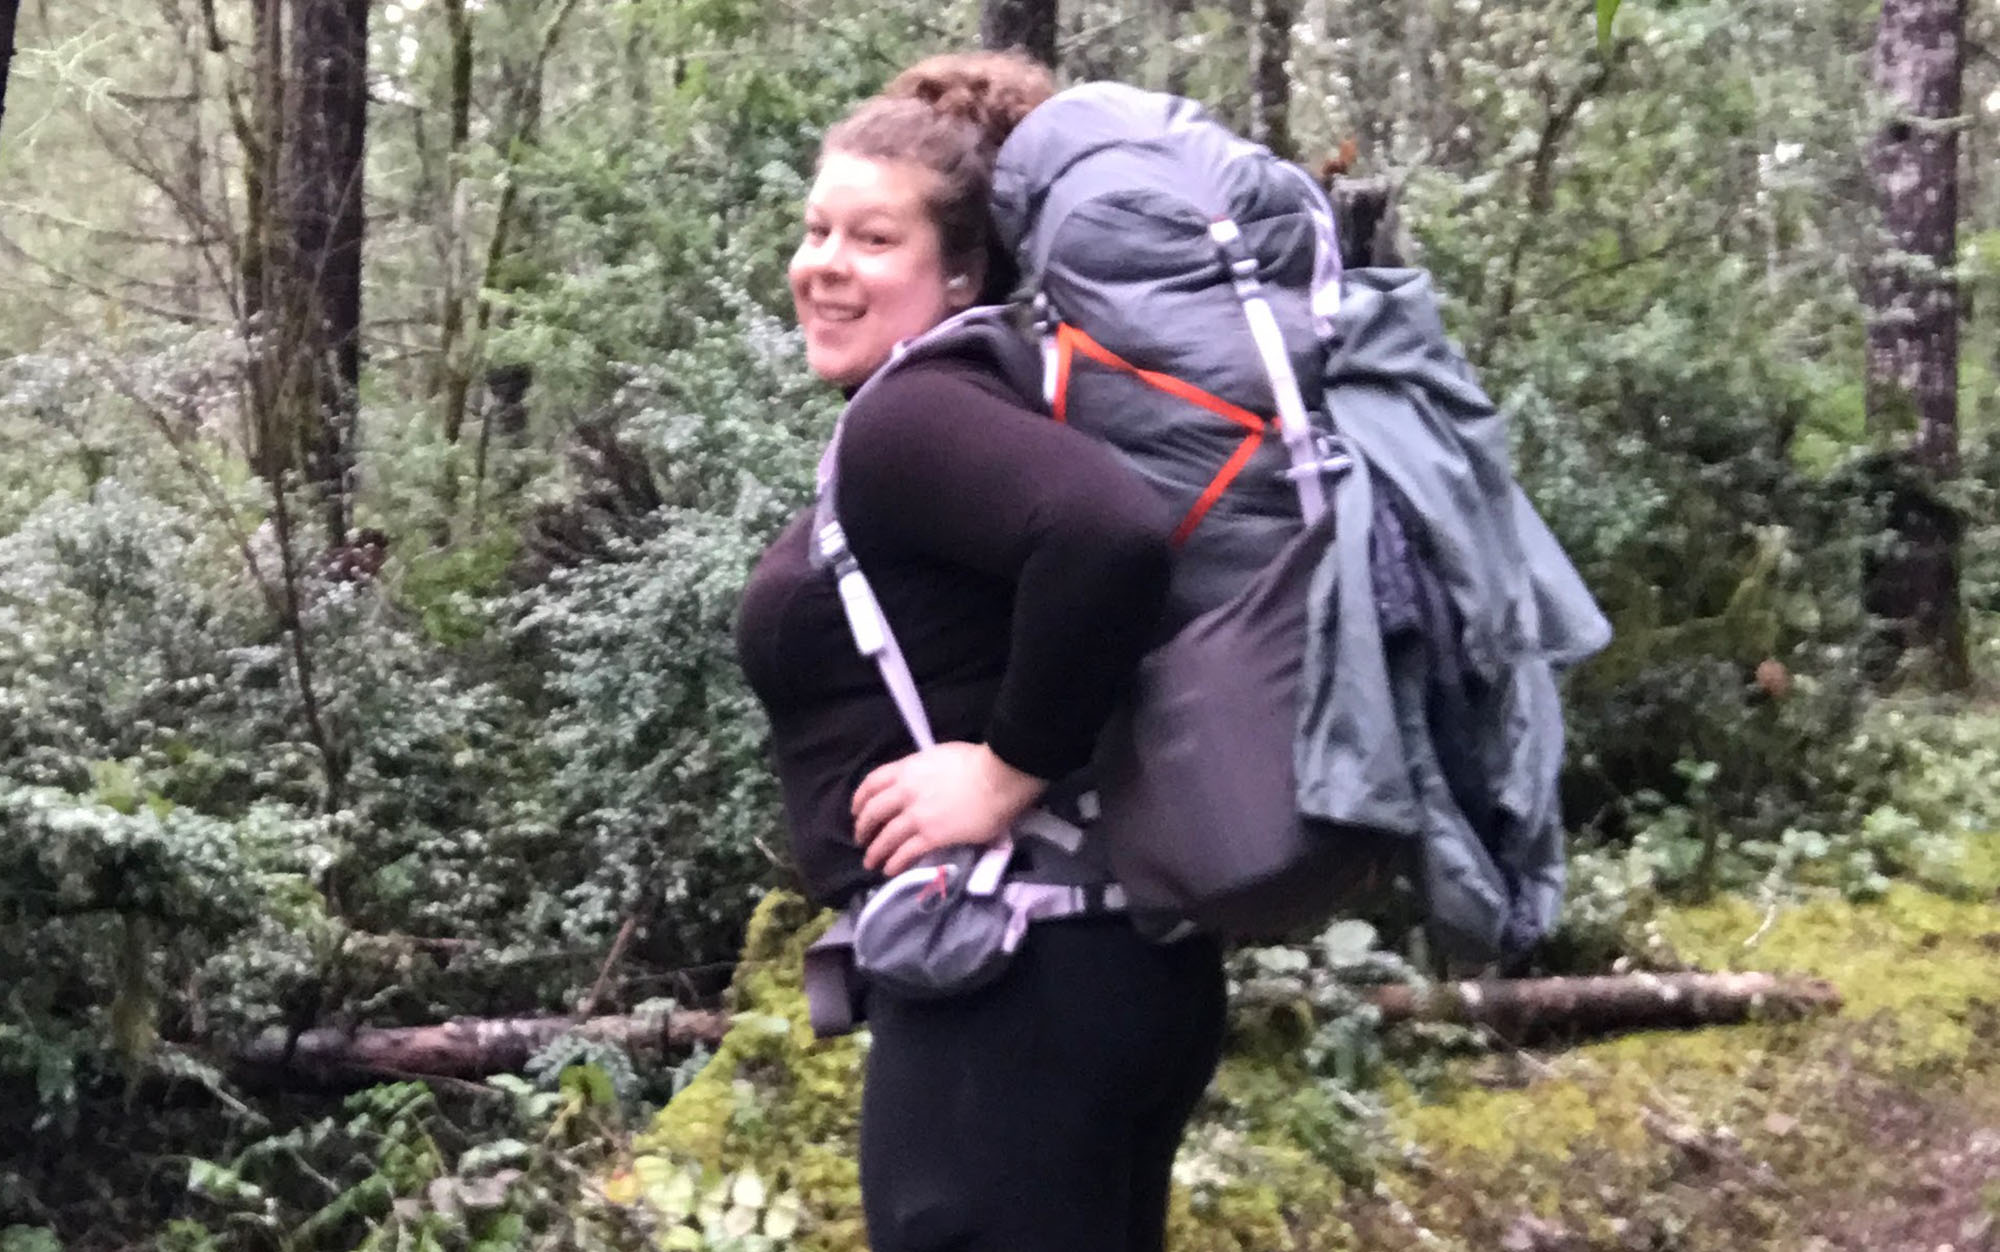 Diana and Rebecca both struggled with the top of the Big Agnes Garnet hitting their heads.